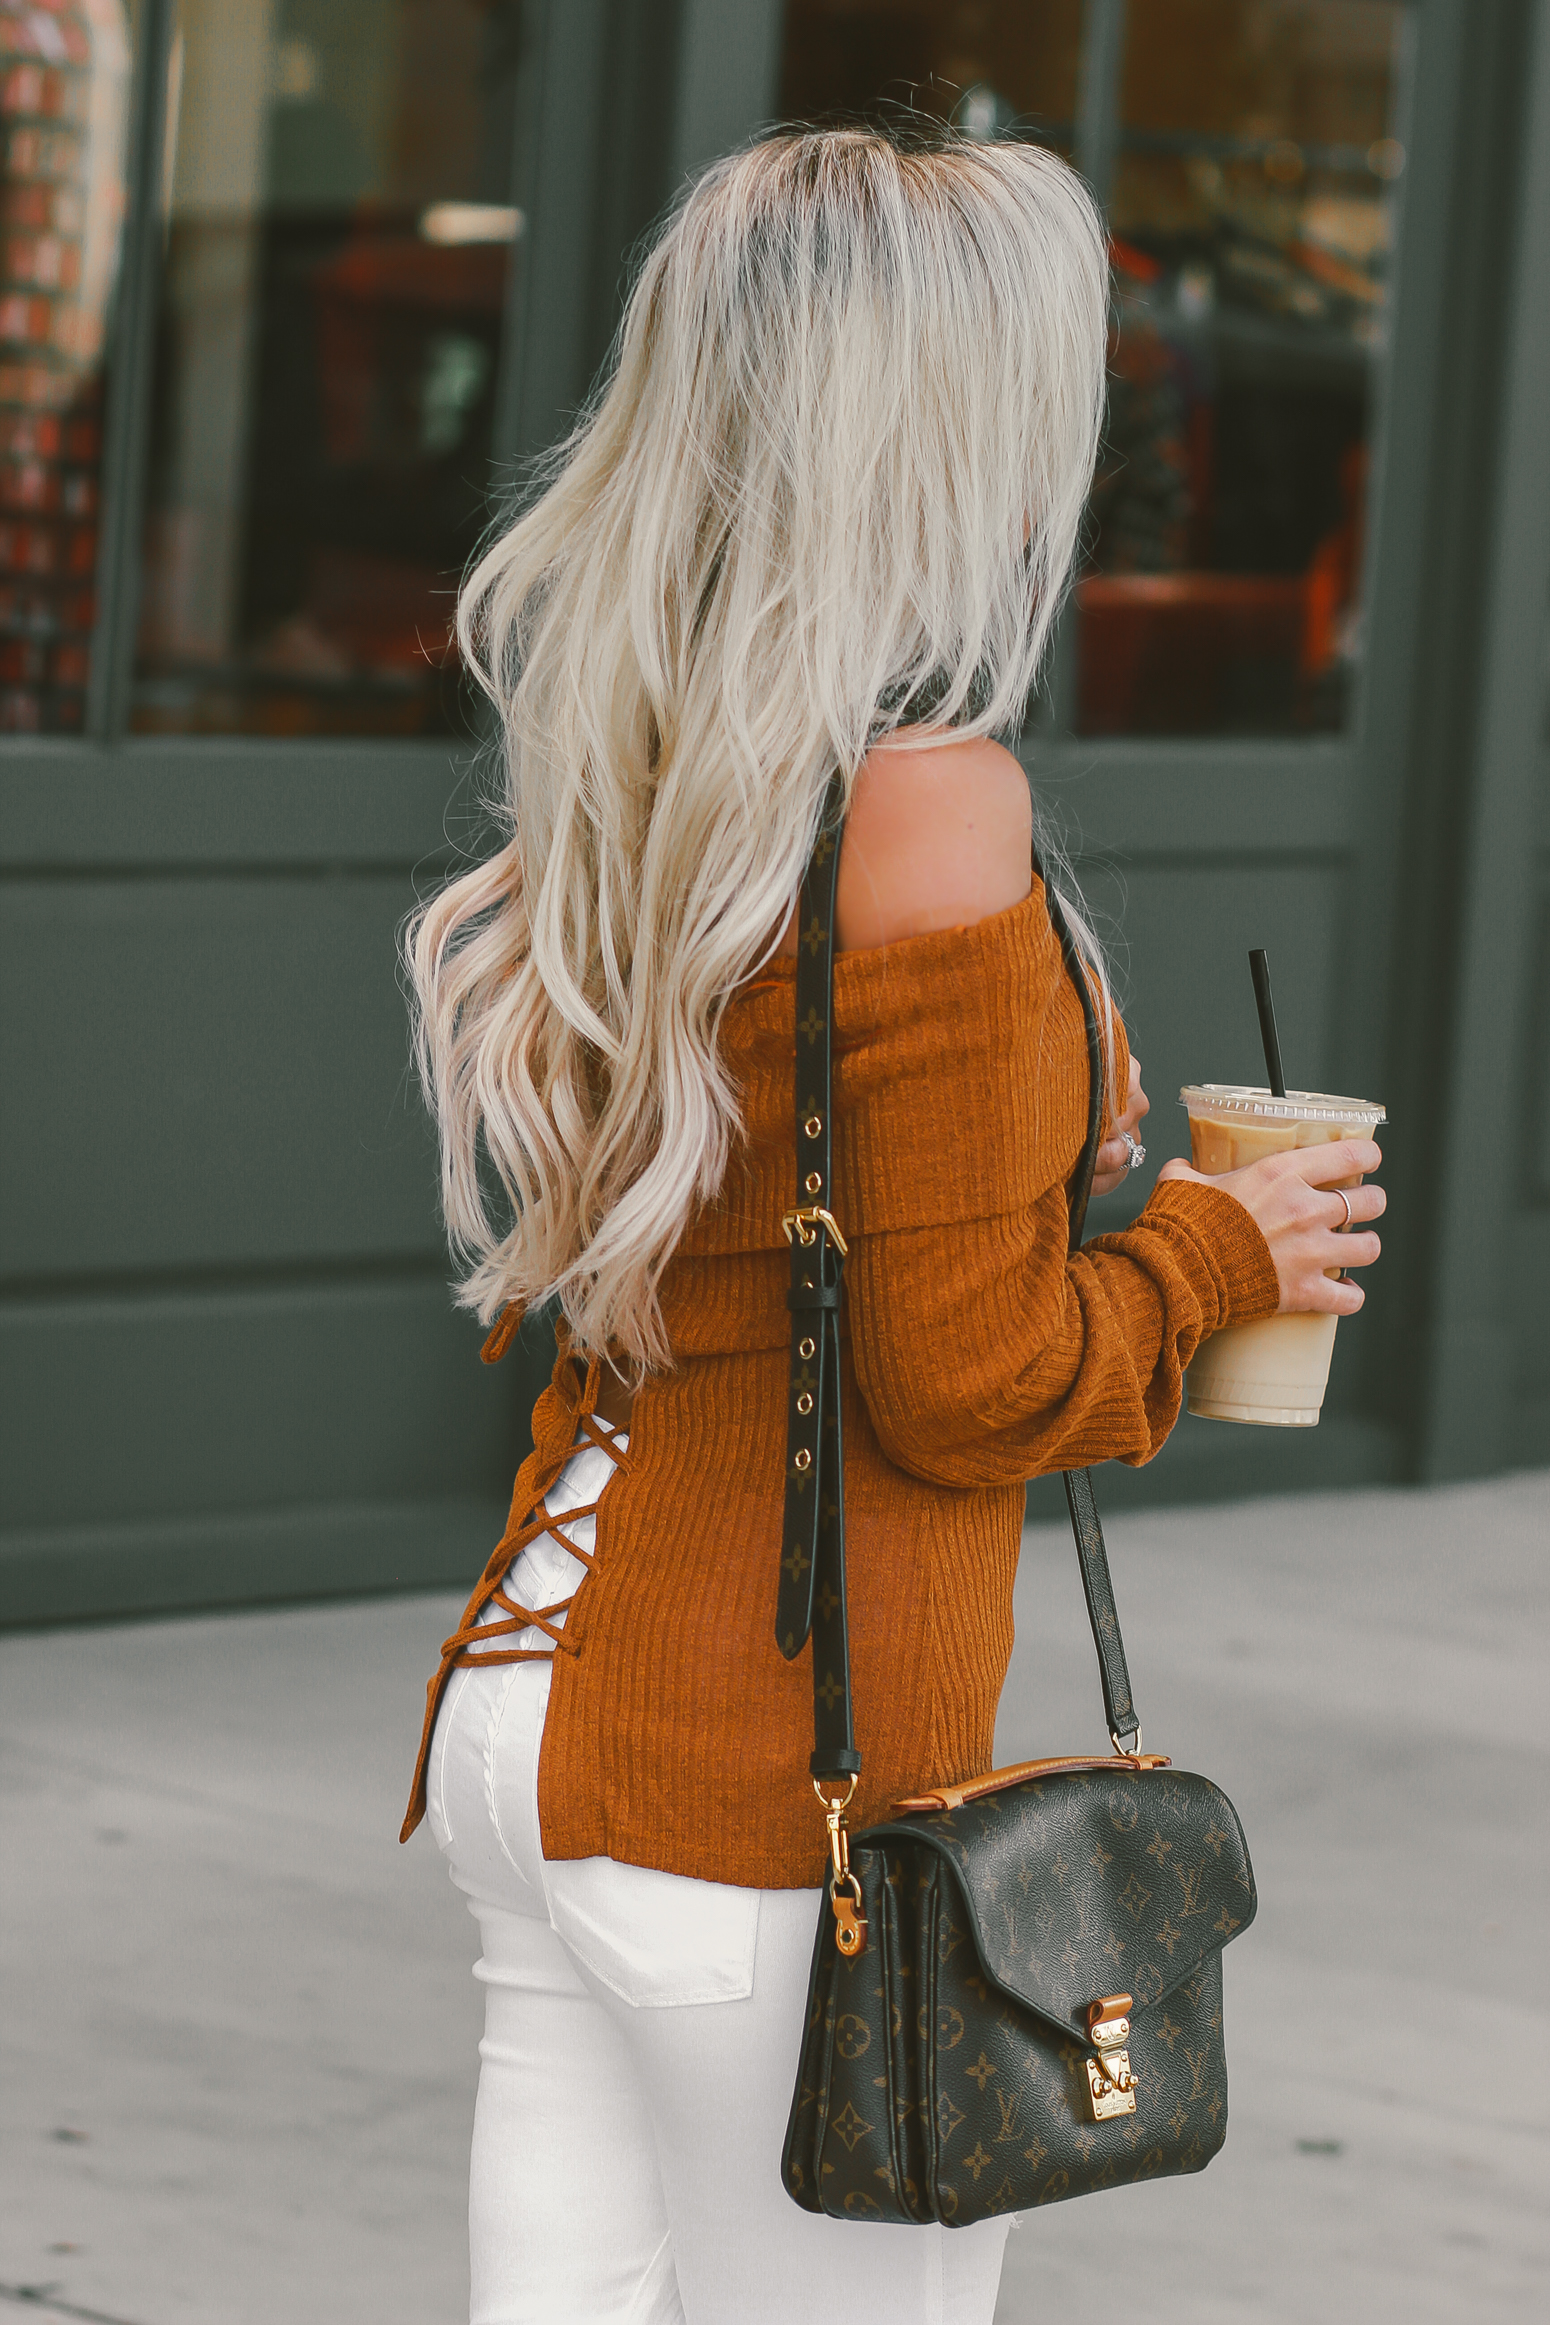 Blondie in the City | Thanksgiving Outfit Inspo